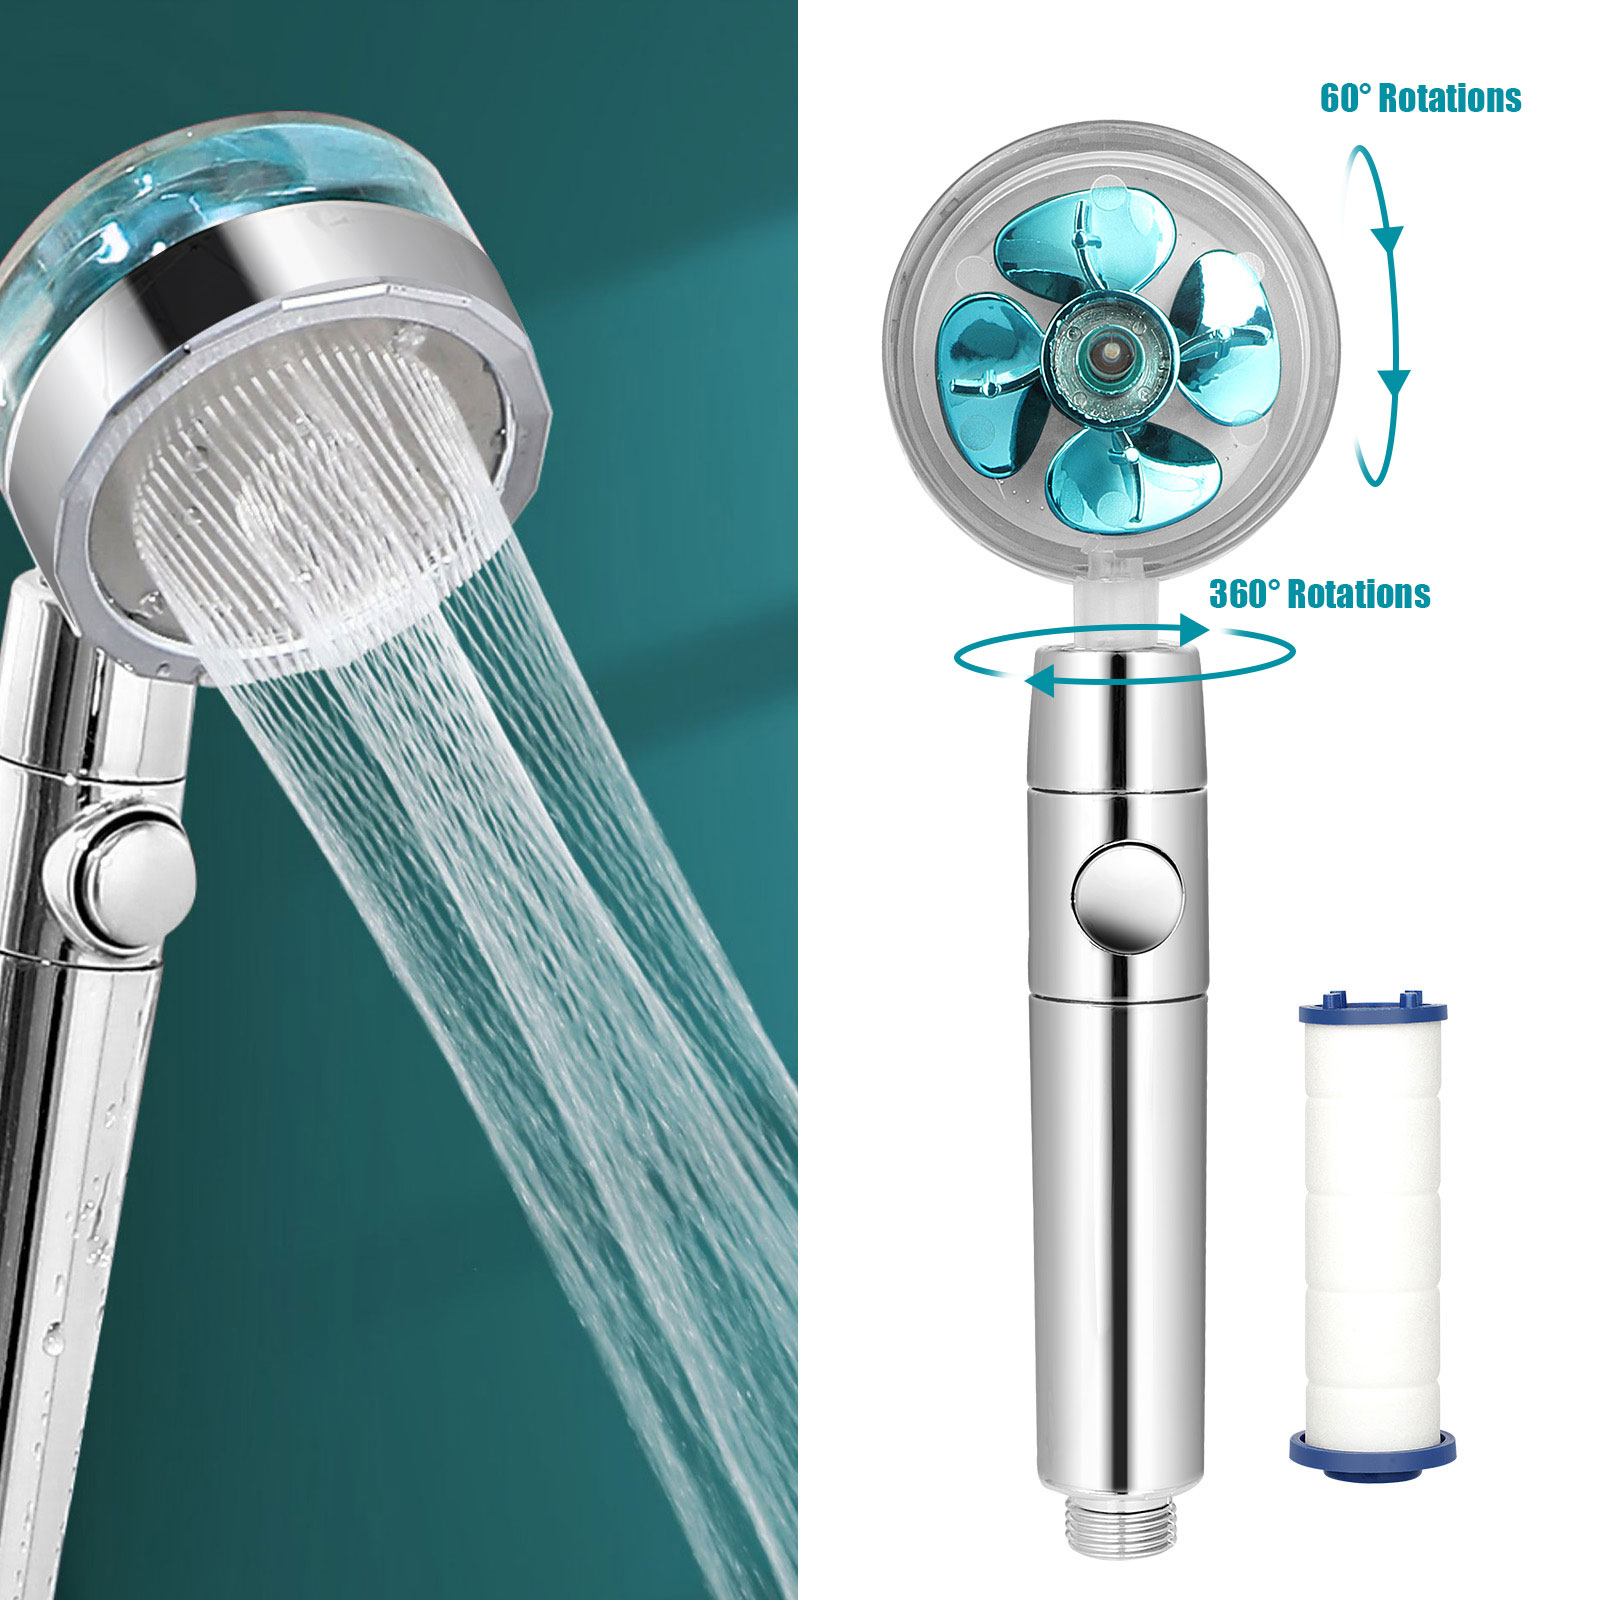 Adjustable Shower Head Negative Ionic Filter Shower Head Water Save Spray Nozzle 